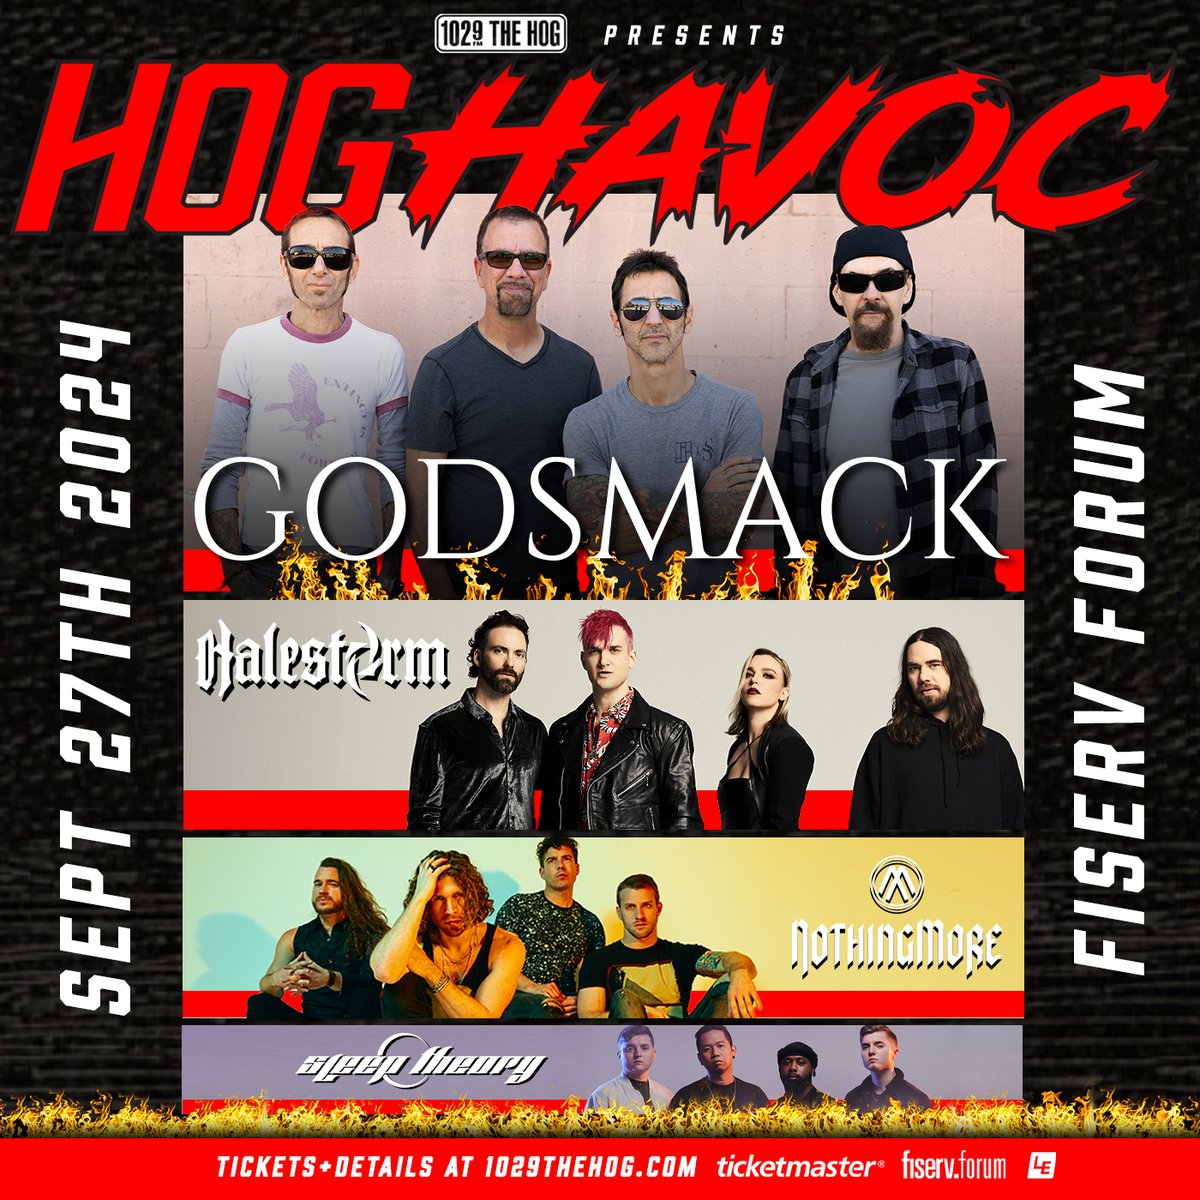 Freaks! We're stoked to join the awesome @Godsmack for @1029thehog's Hog Havoc this September in Milwaukee. Tickets are on sale this Friday, don't miss it🤘